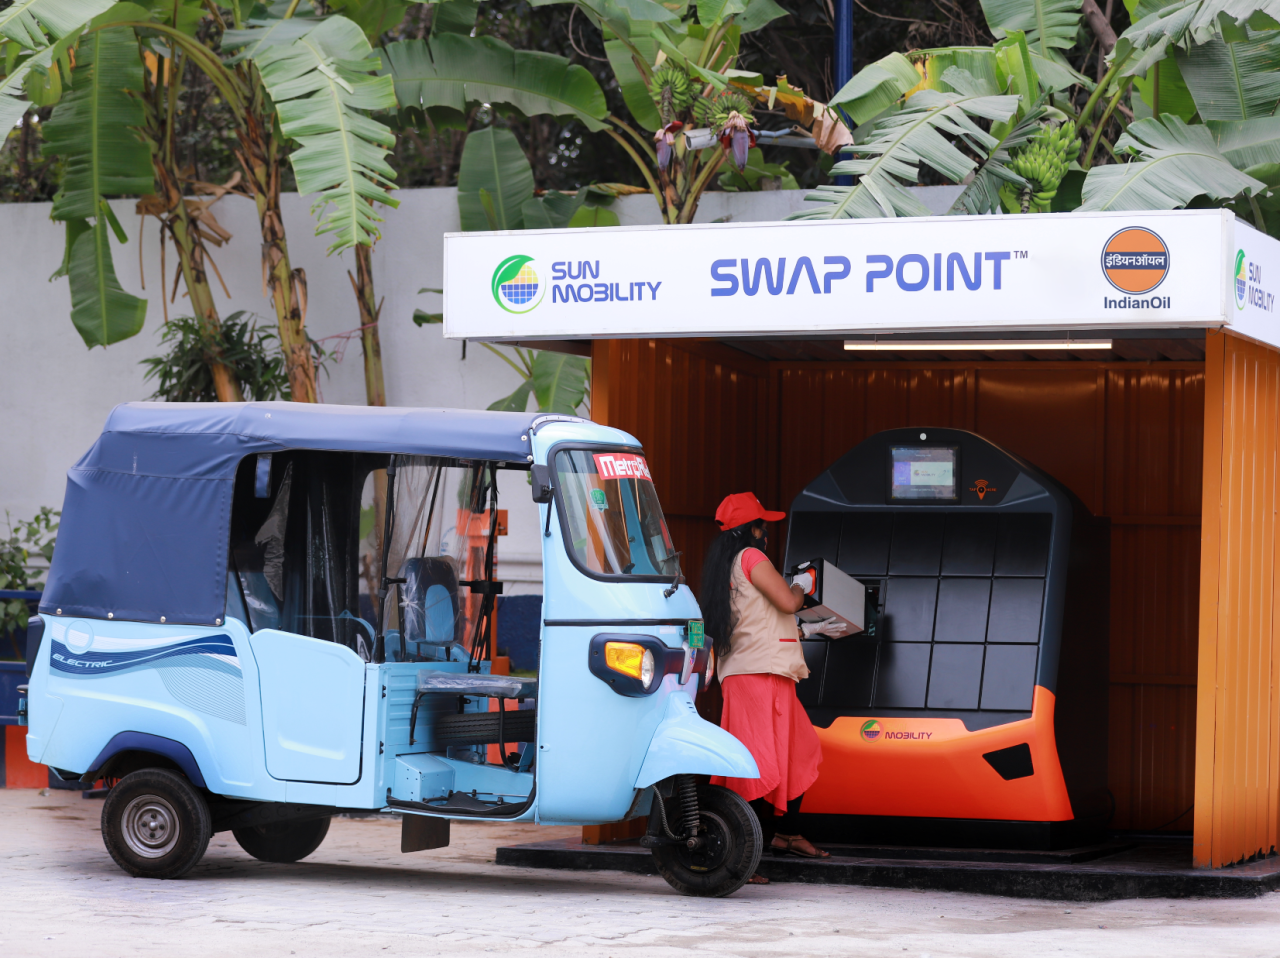 Indian Oil inks landmark deal with SUN Mobility for establishing over 10,000 battery-swapping stations